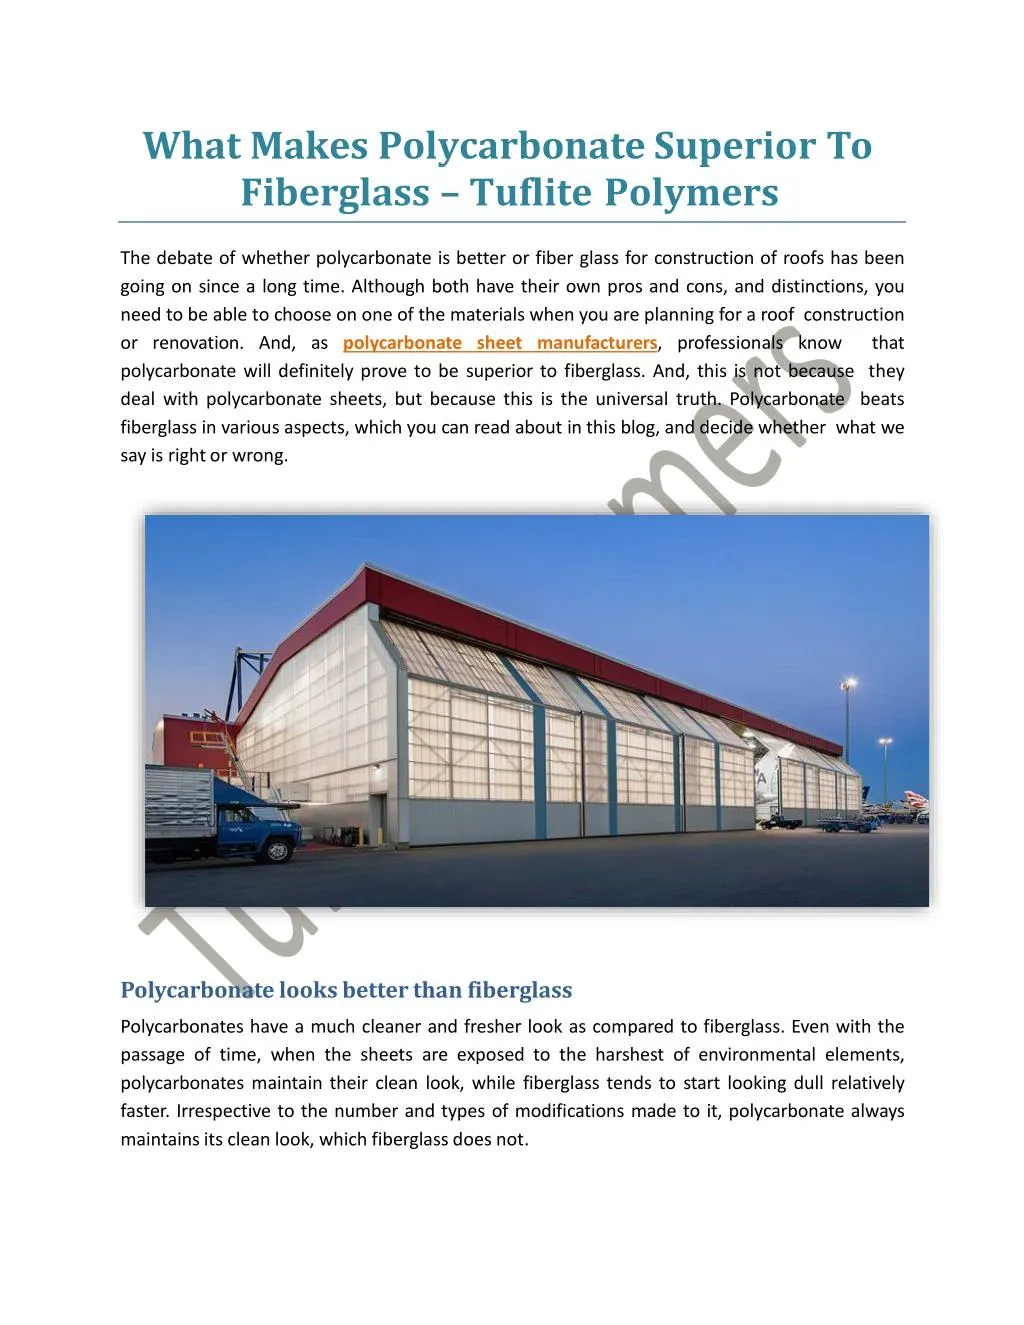 what makes polycarbonate superior to fiberglass tuflite polymers